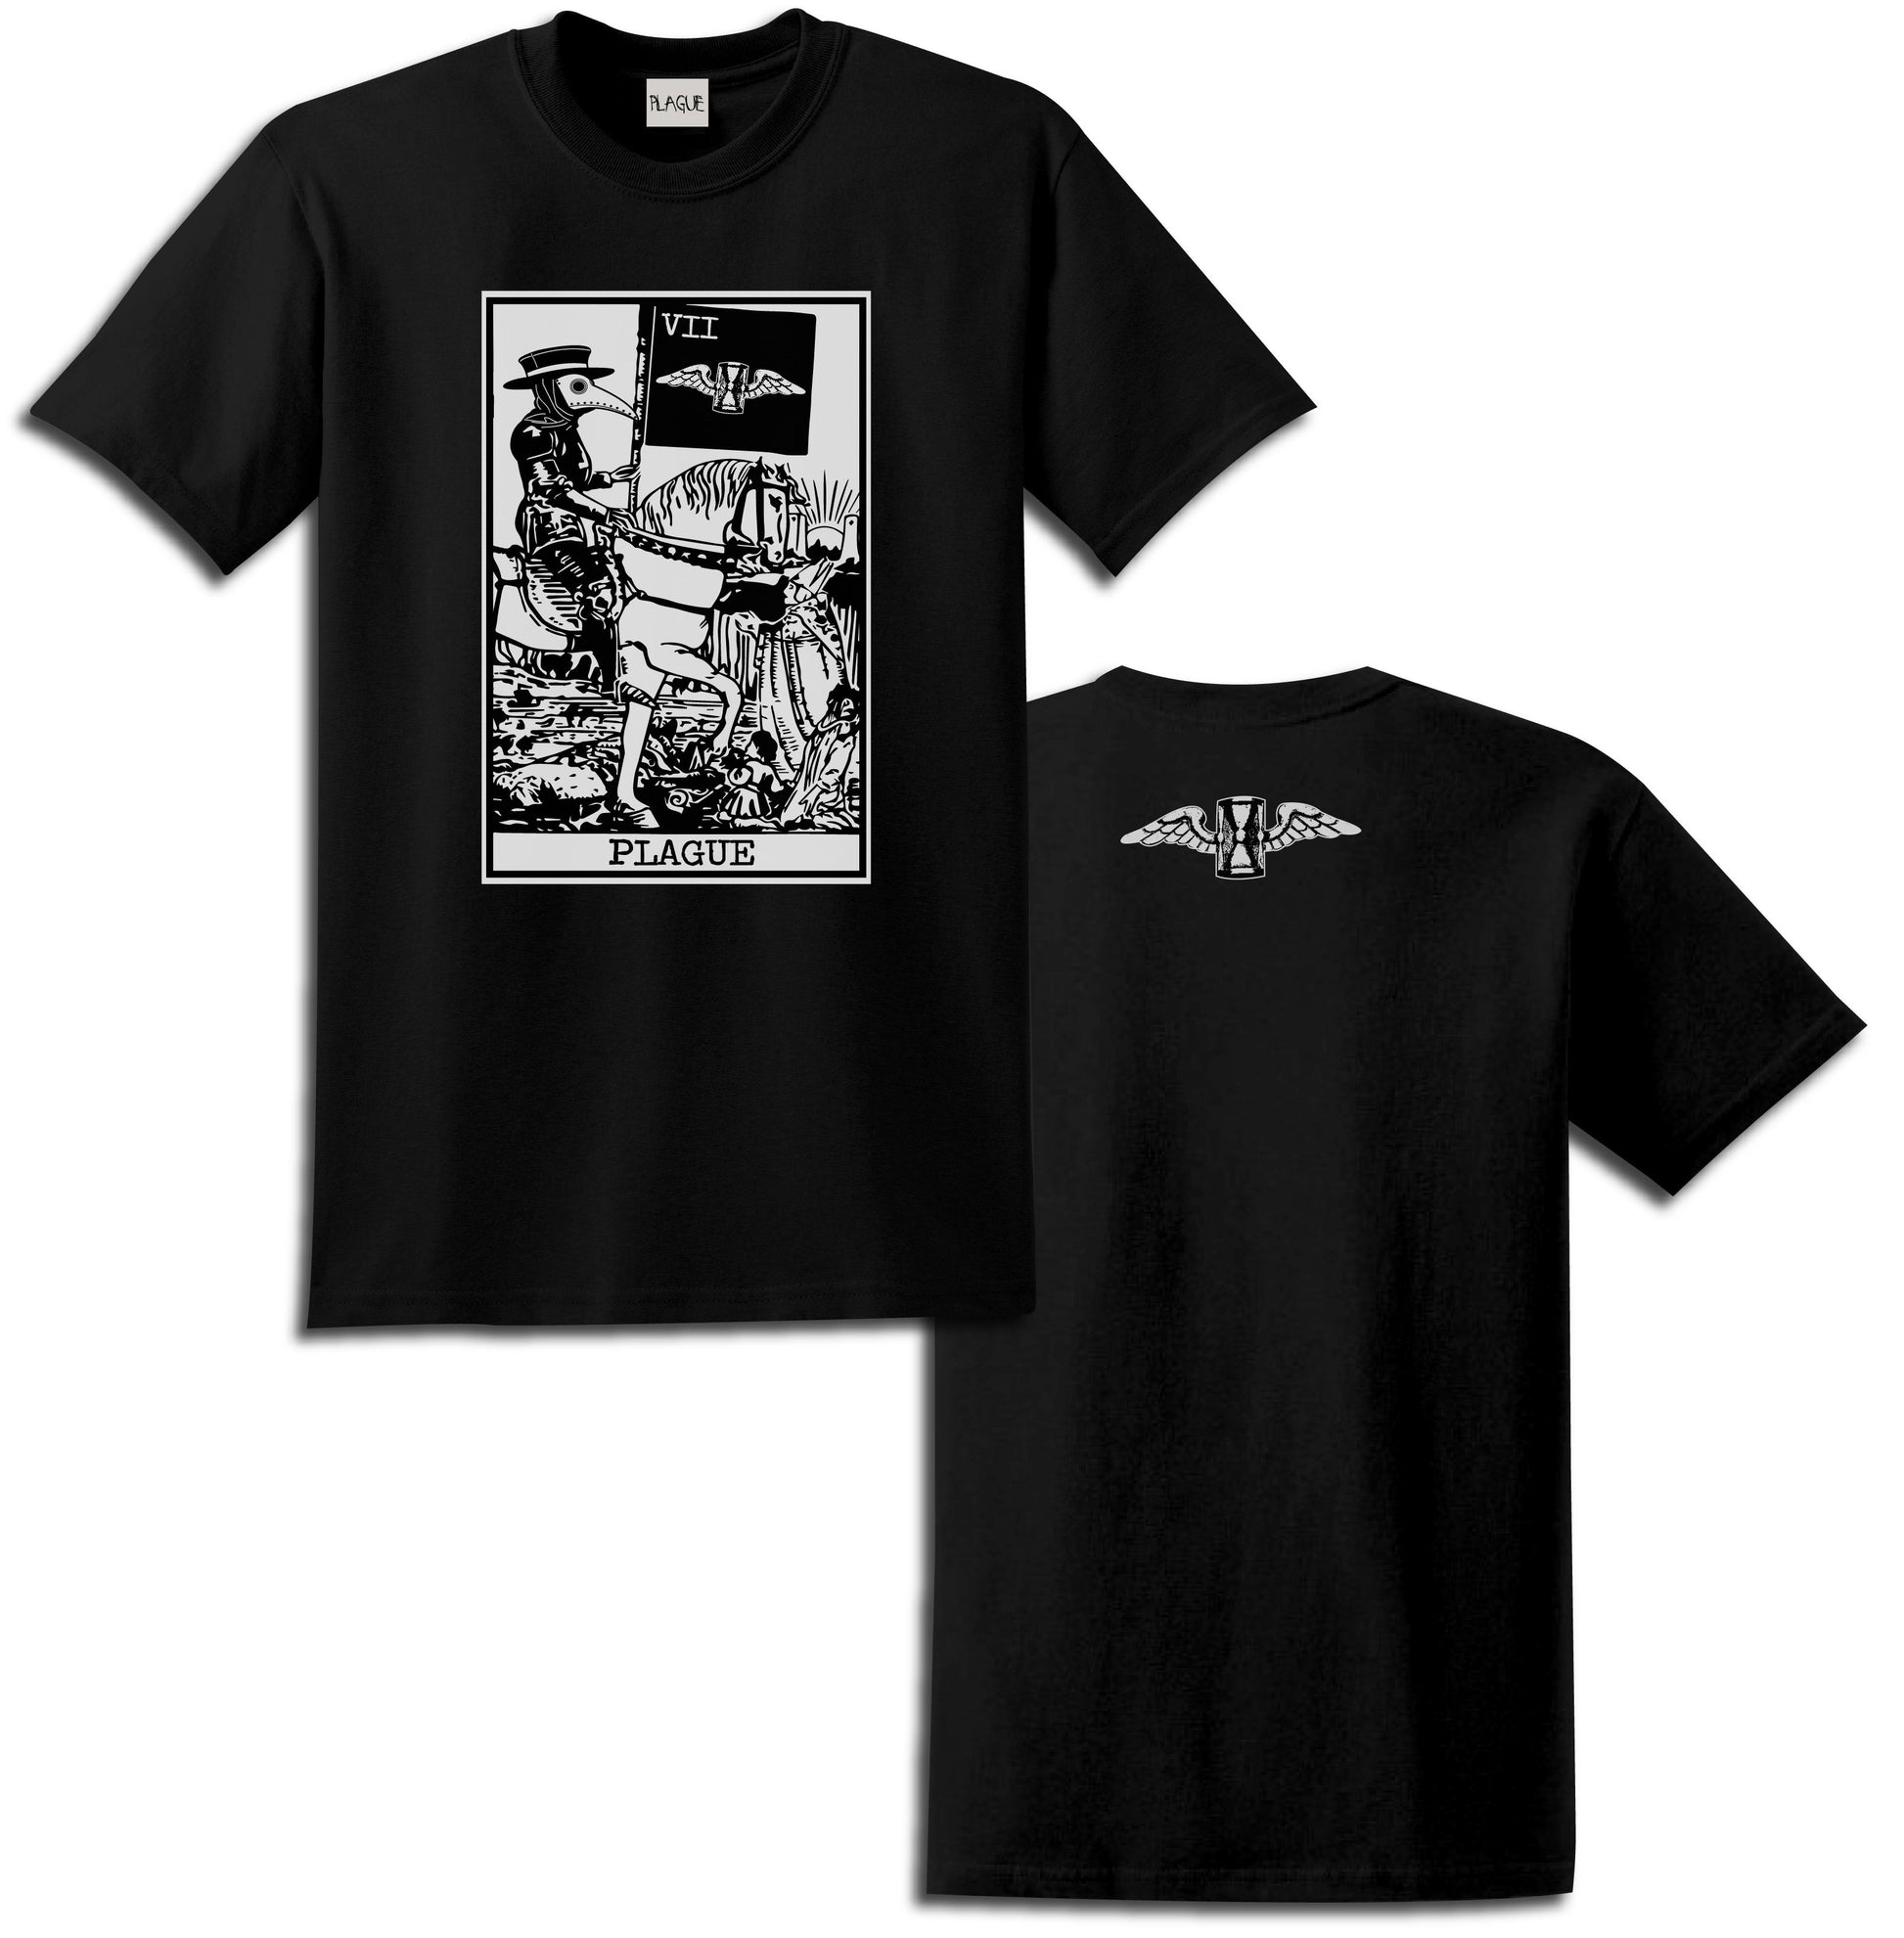 Classic tarot card with a twist. Featuring the "Plague Card" on the front of tee. Small back design of an hour class with wings near the collar of shirt. Available in black and white. 